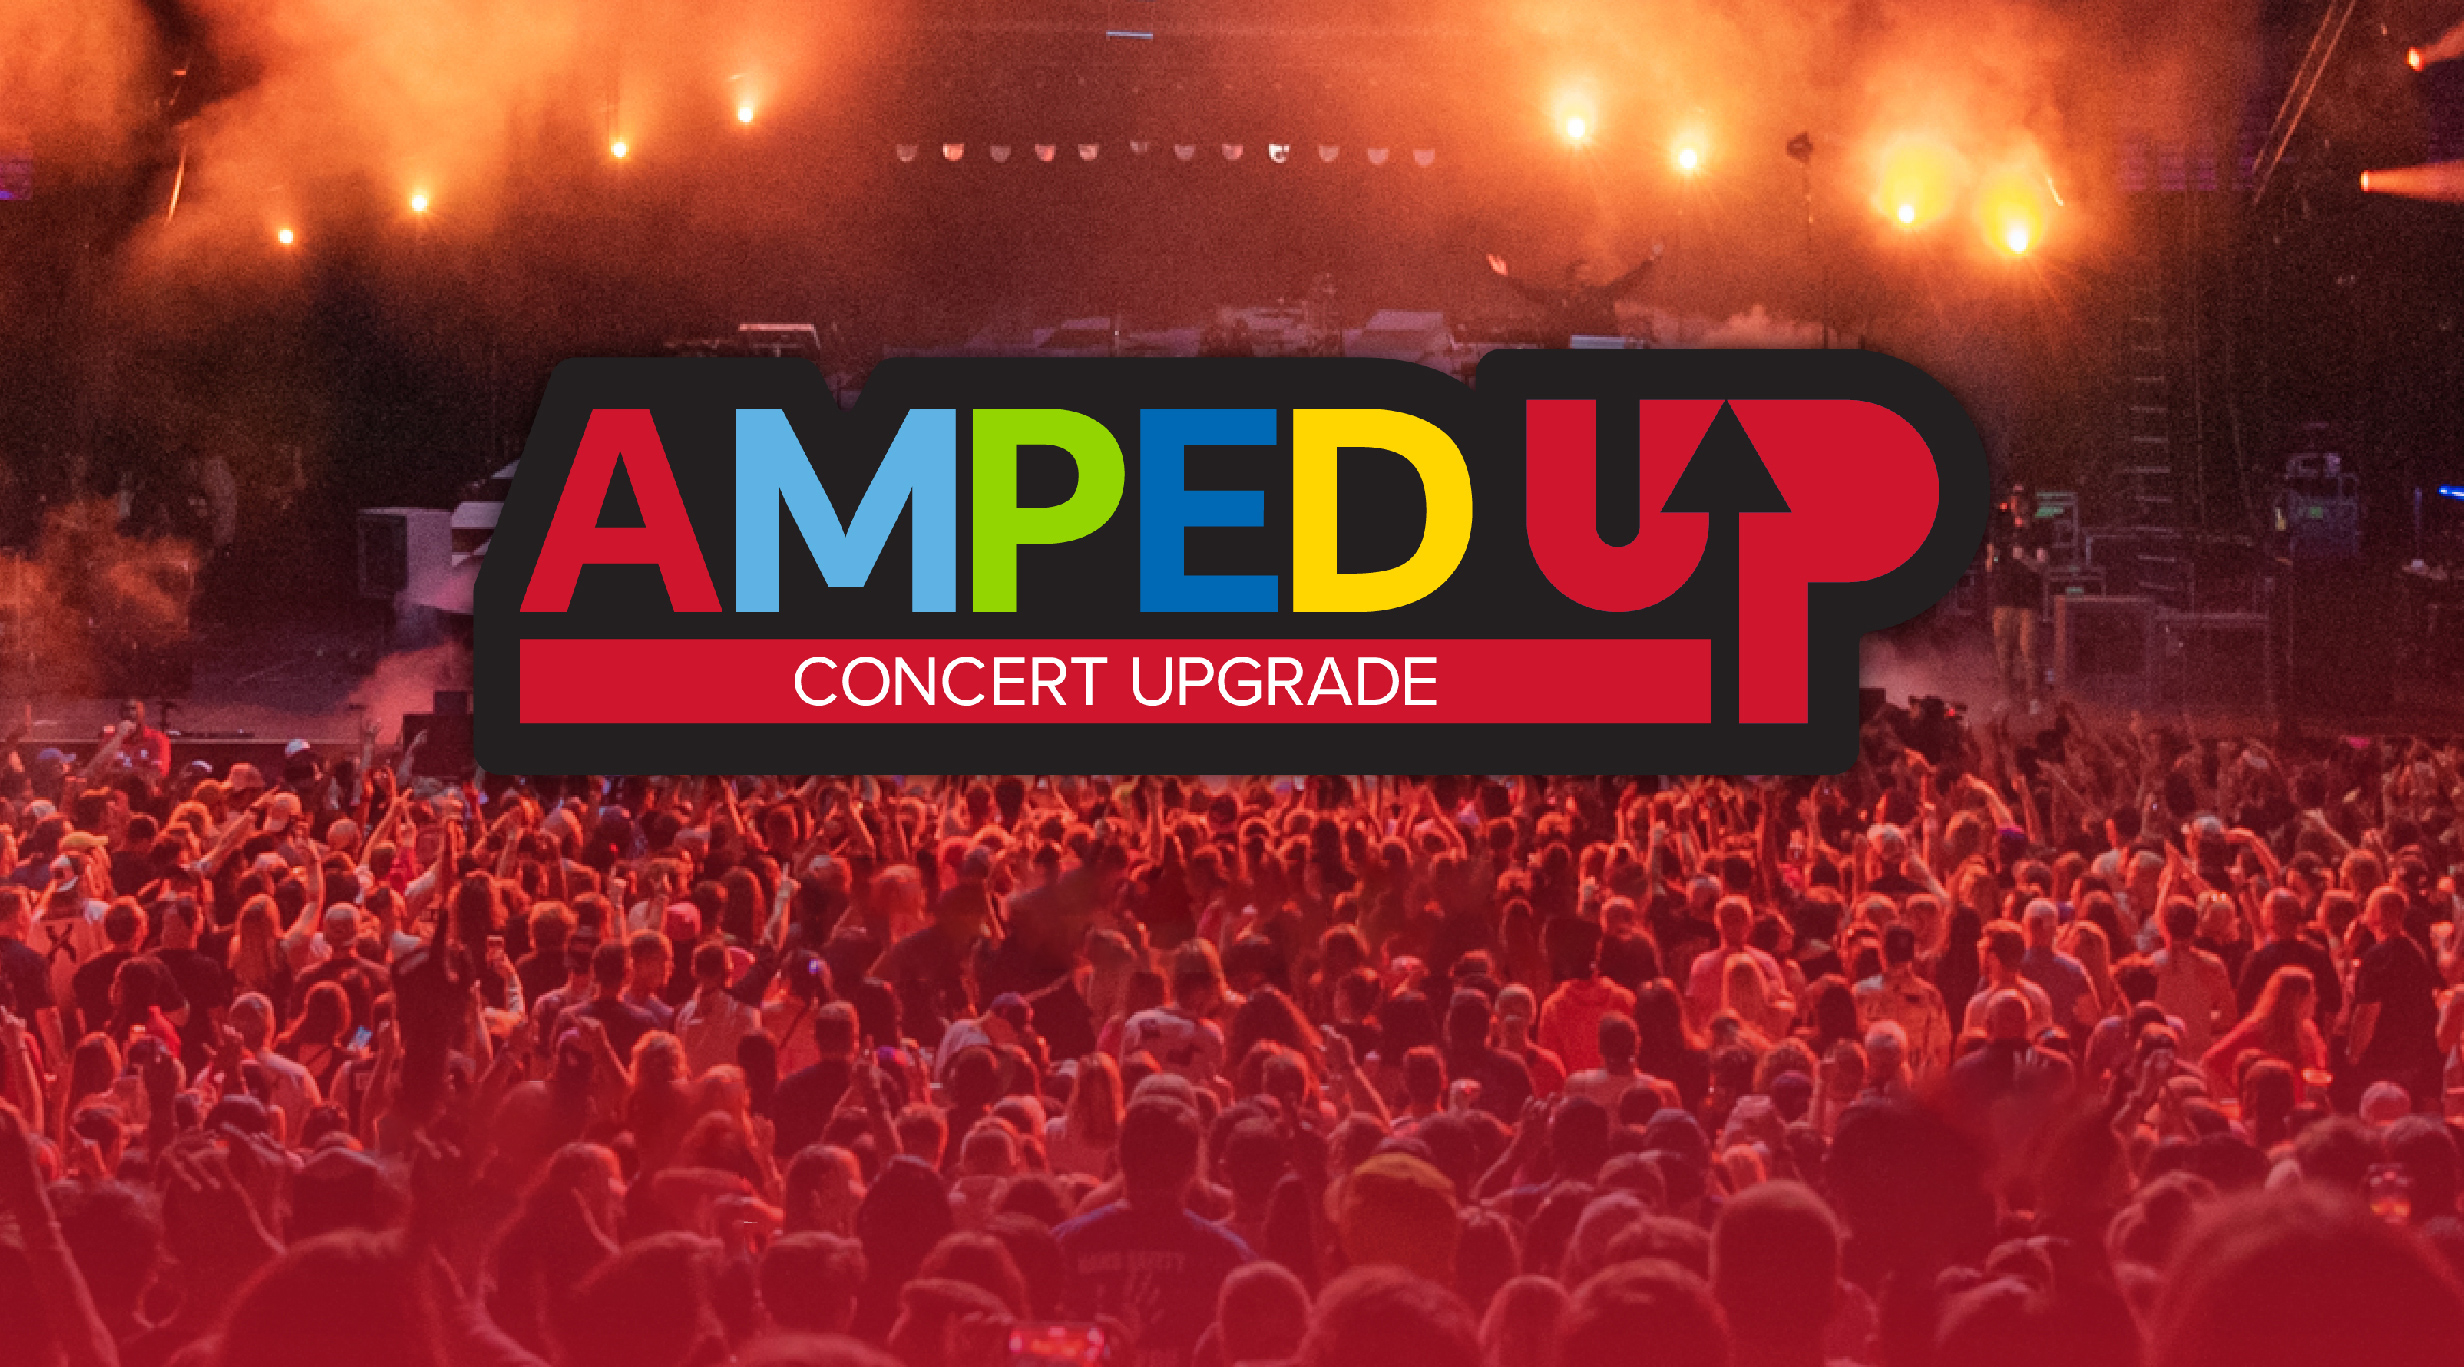 Barbie The Movie  Amped Up Concert Upgrade NOT A Concert Ticket